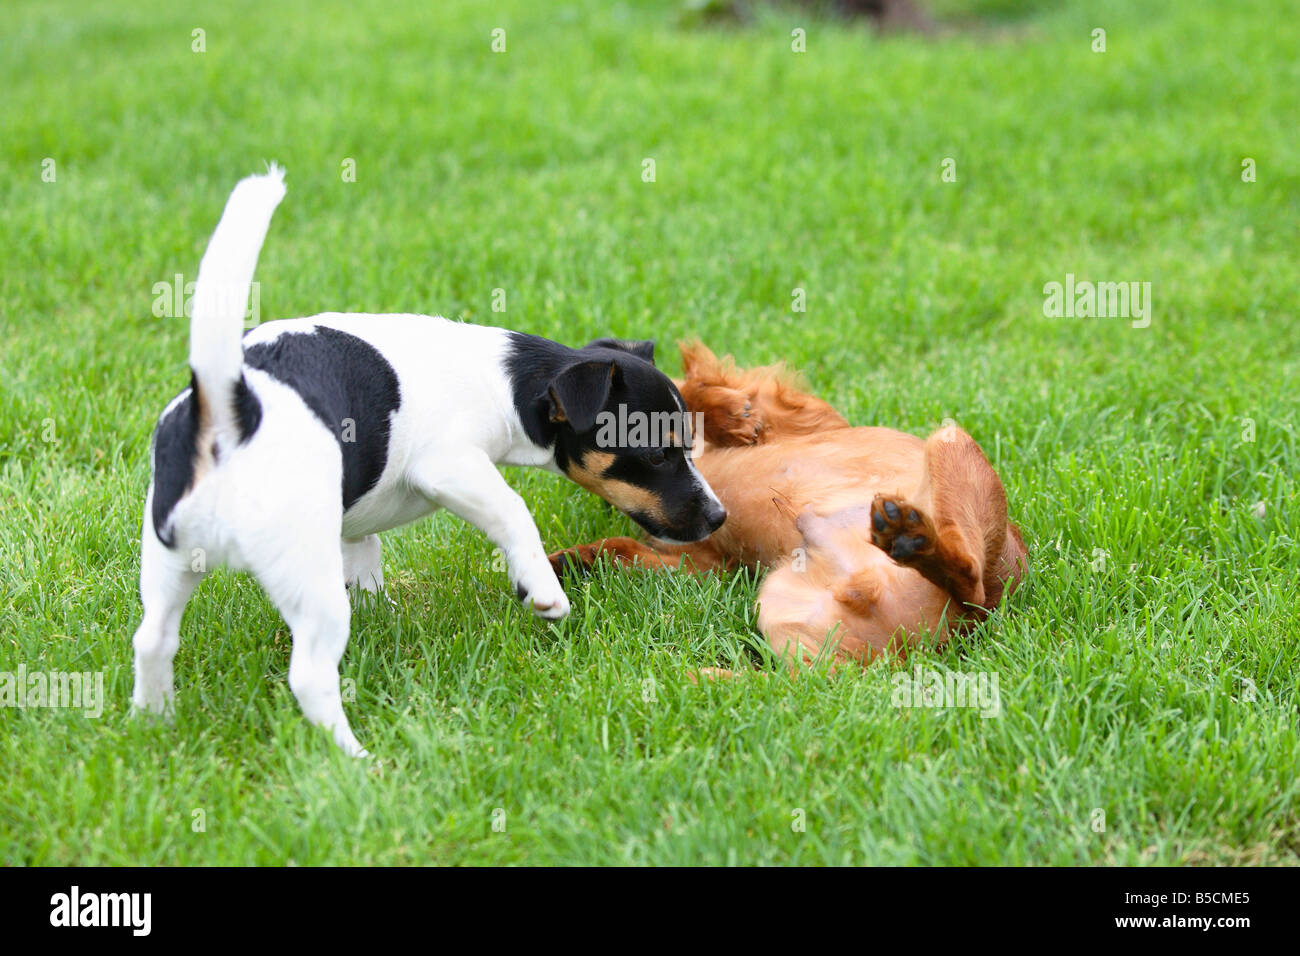 Jack Russell Terrier and Cavalier King Charles Spaniel ruby puppies 4 month submissive behaviour Stock Photo